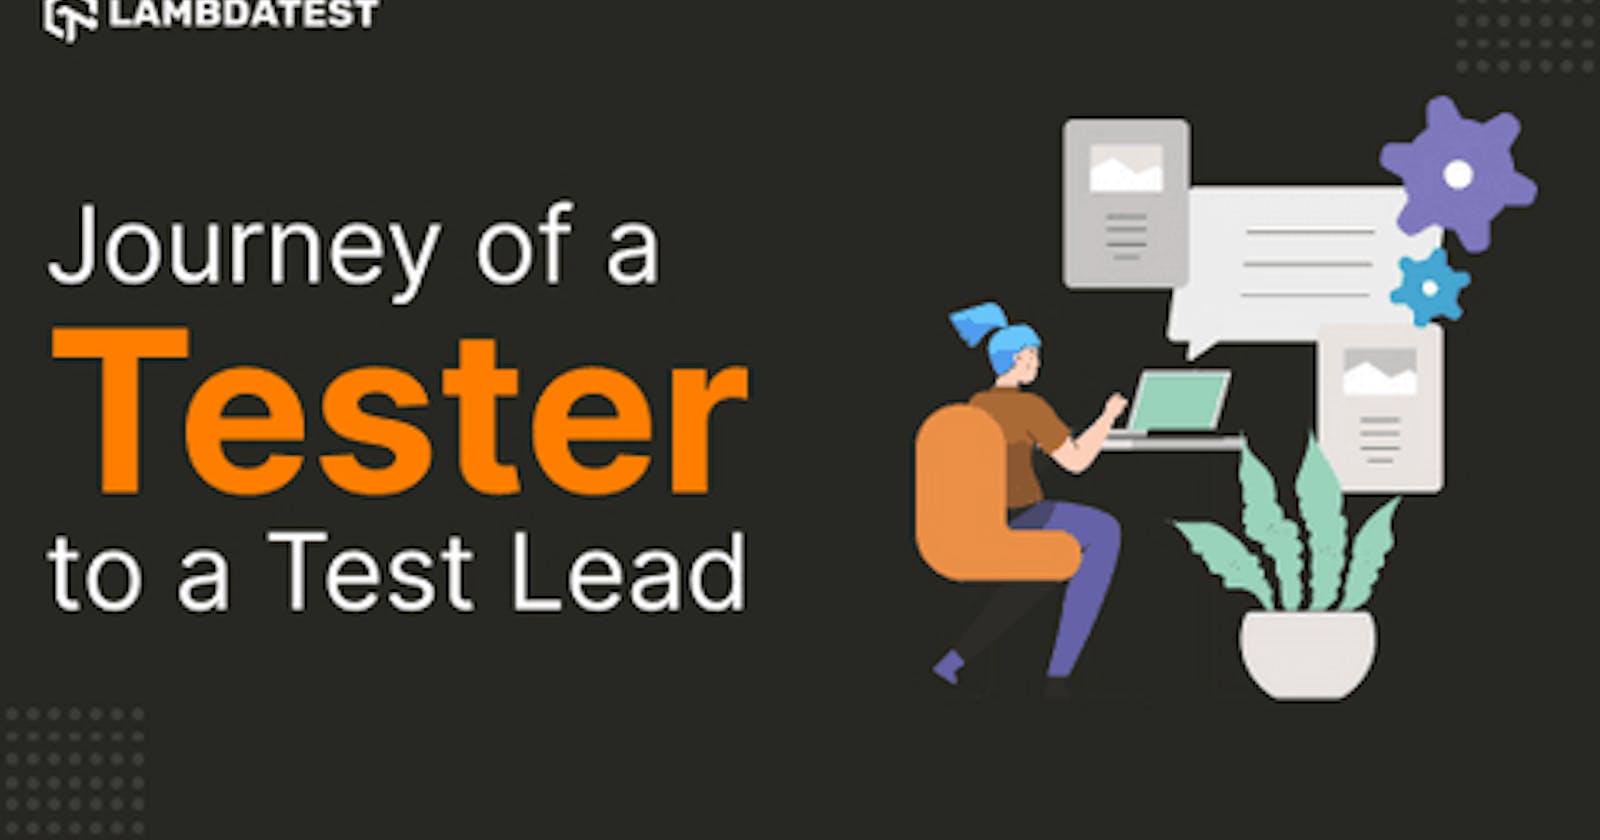 Journey of a Tester to a Test Lead